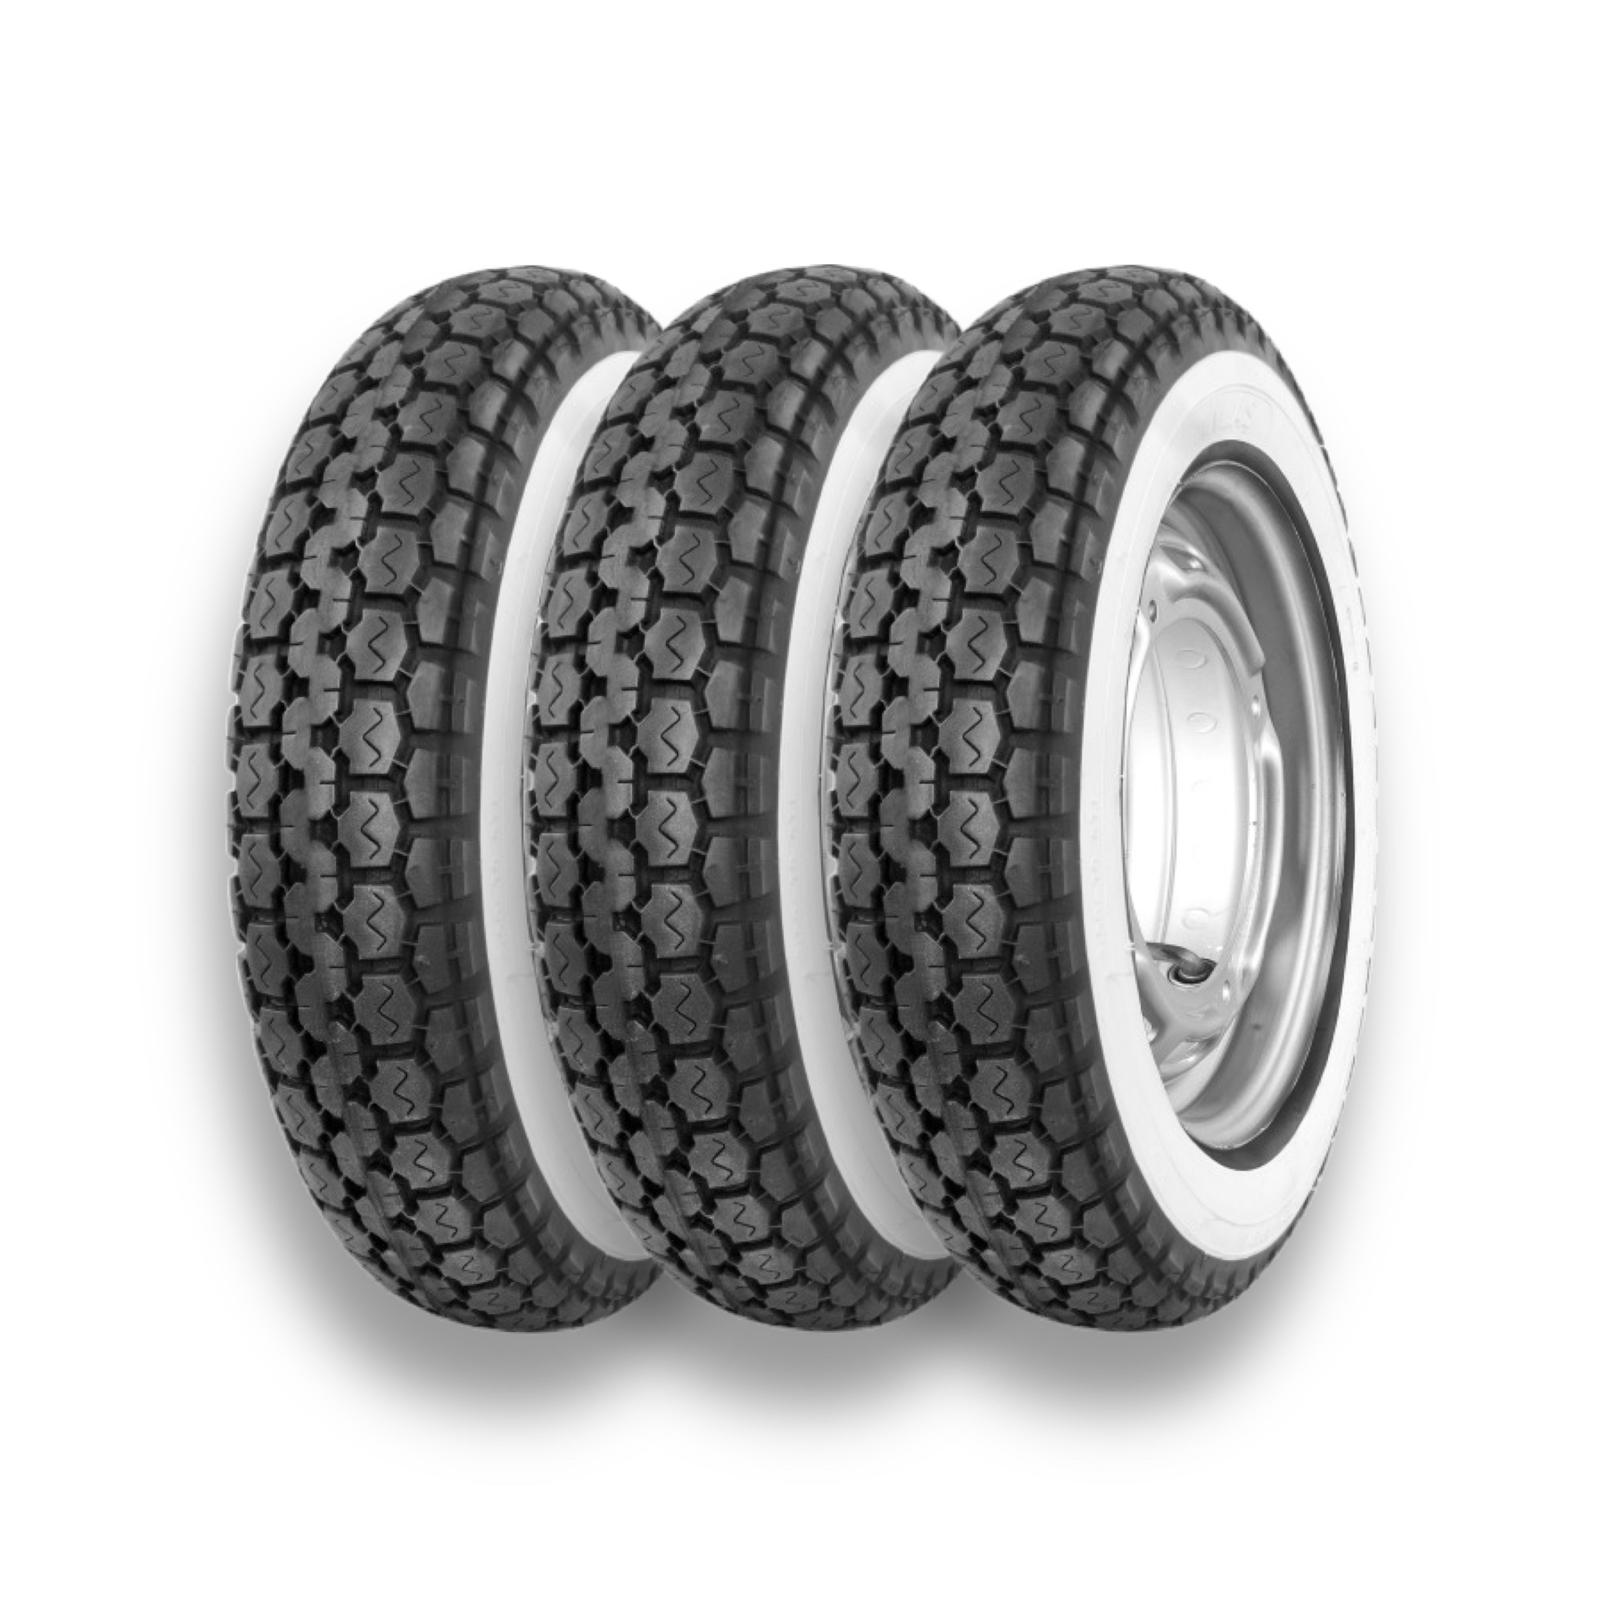 Anlas Sport Classic 350 x 10 Whitewall Lambretta Vespa Scooter Tyre - Pack of 3